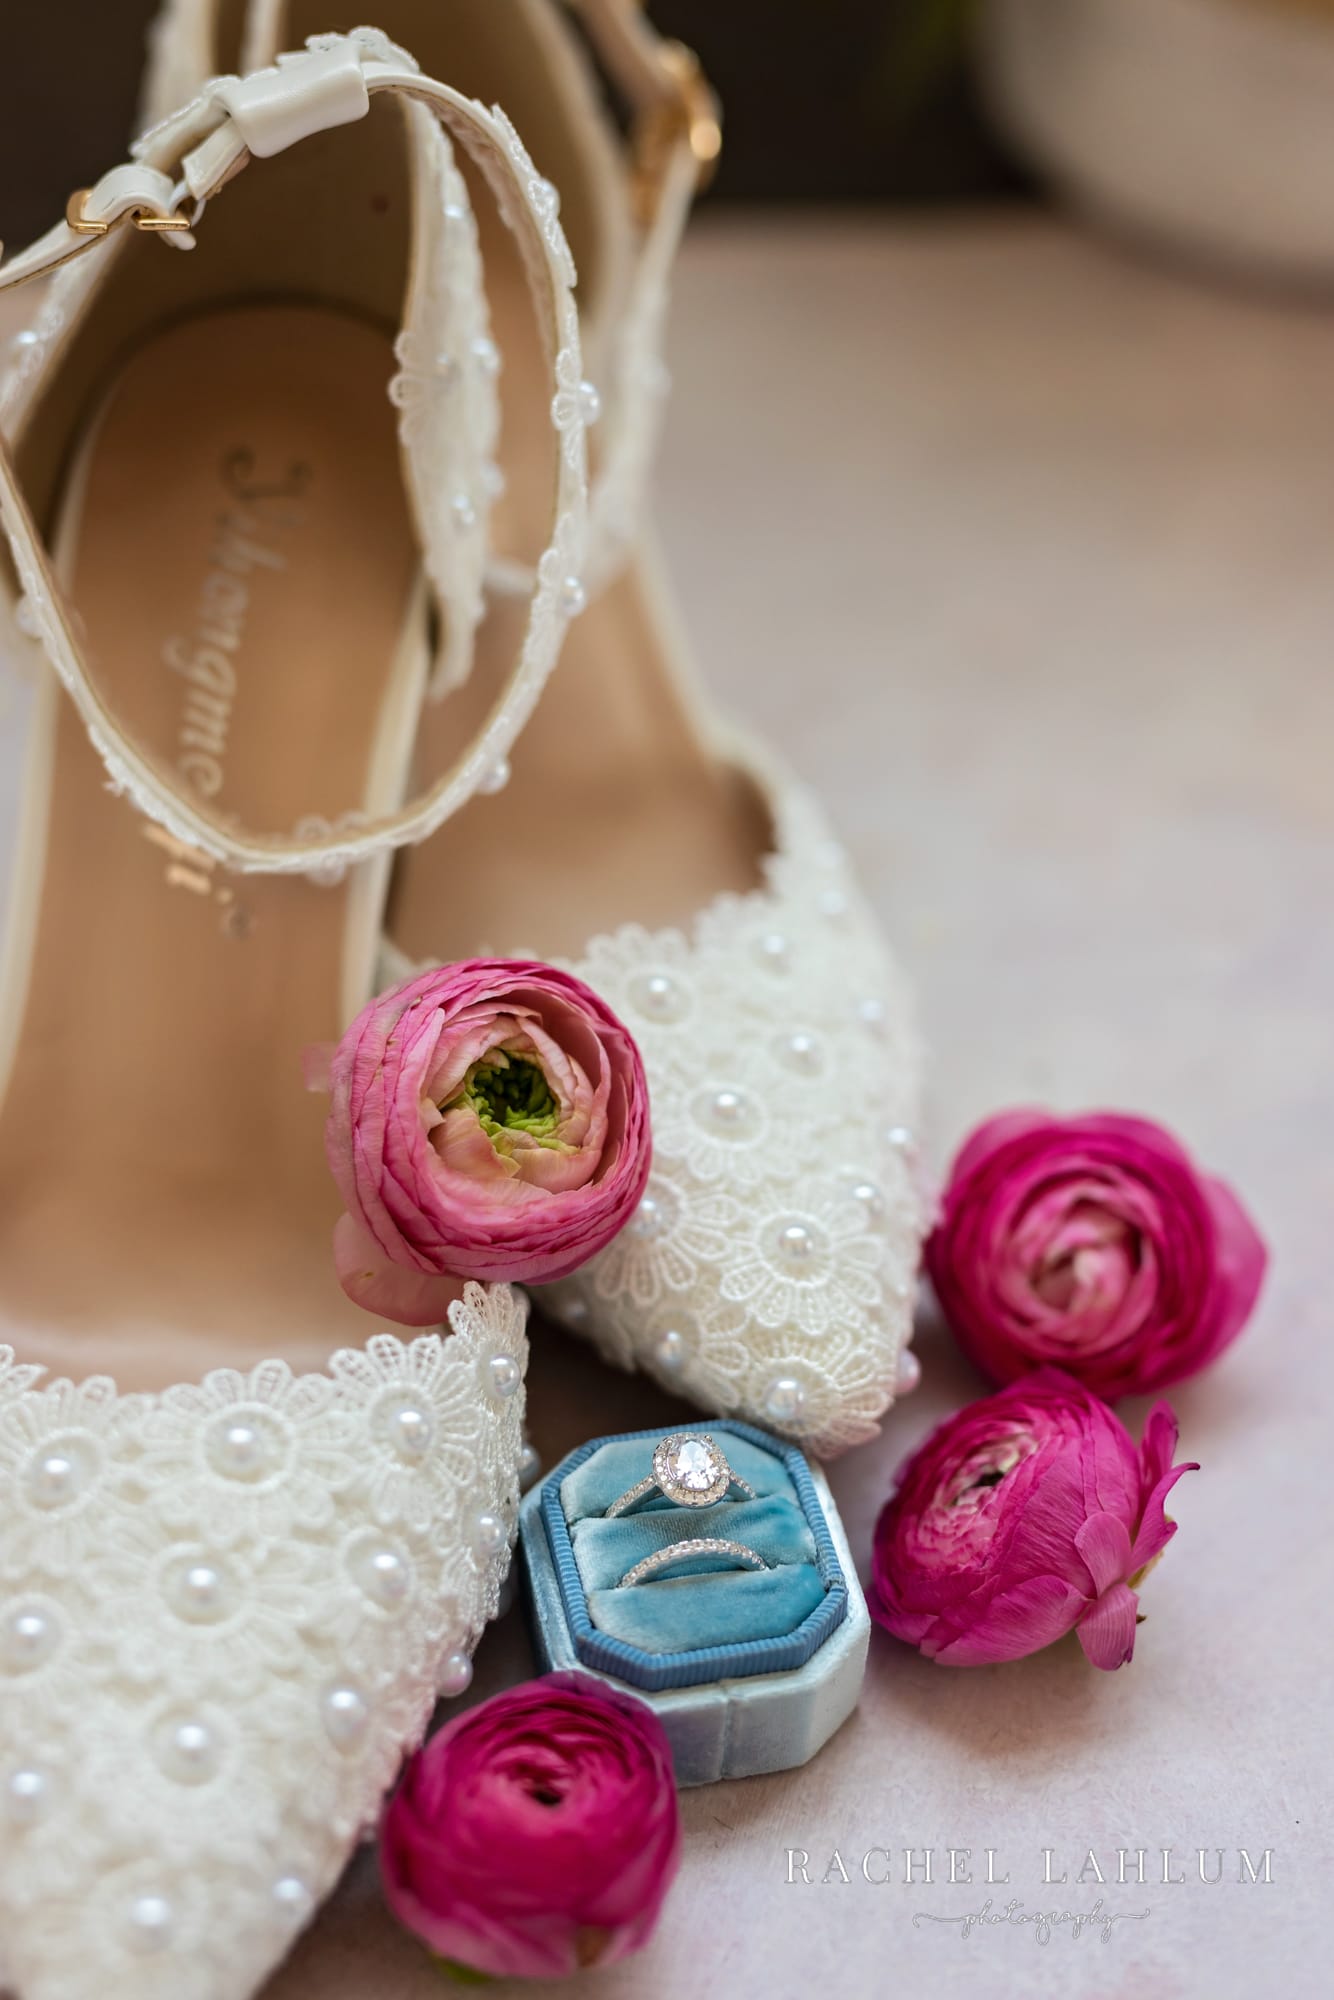 Close-up photo of wedding ring in box with pink flowers and details of wedding shoes.